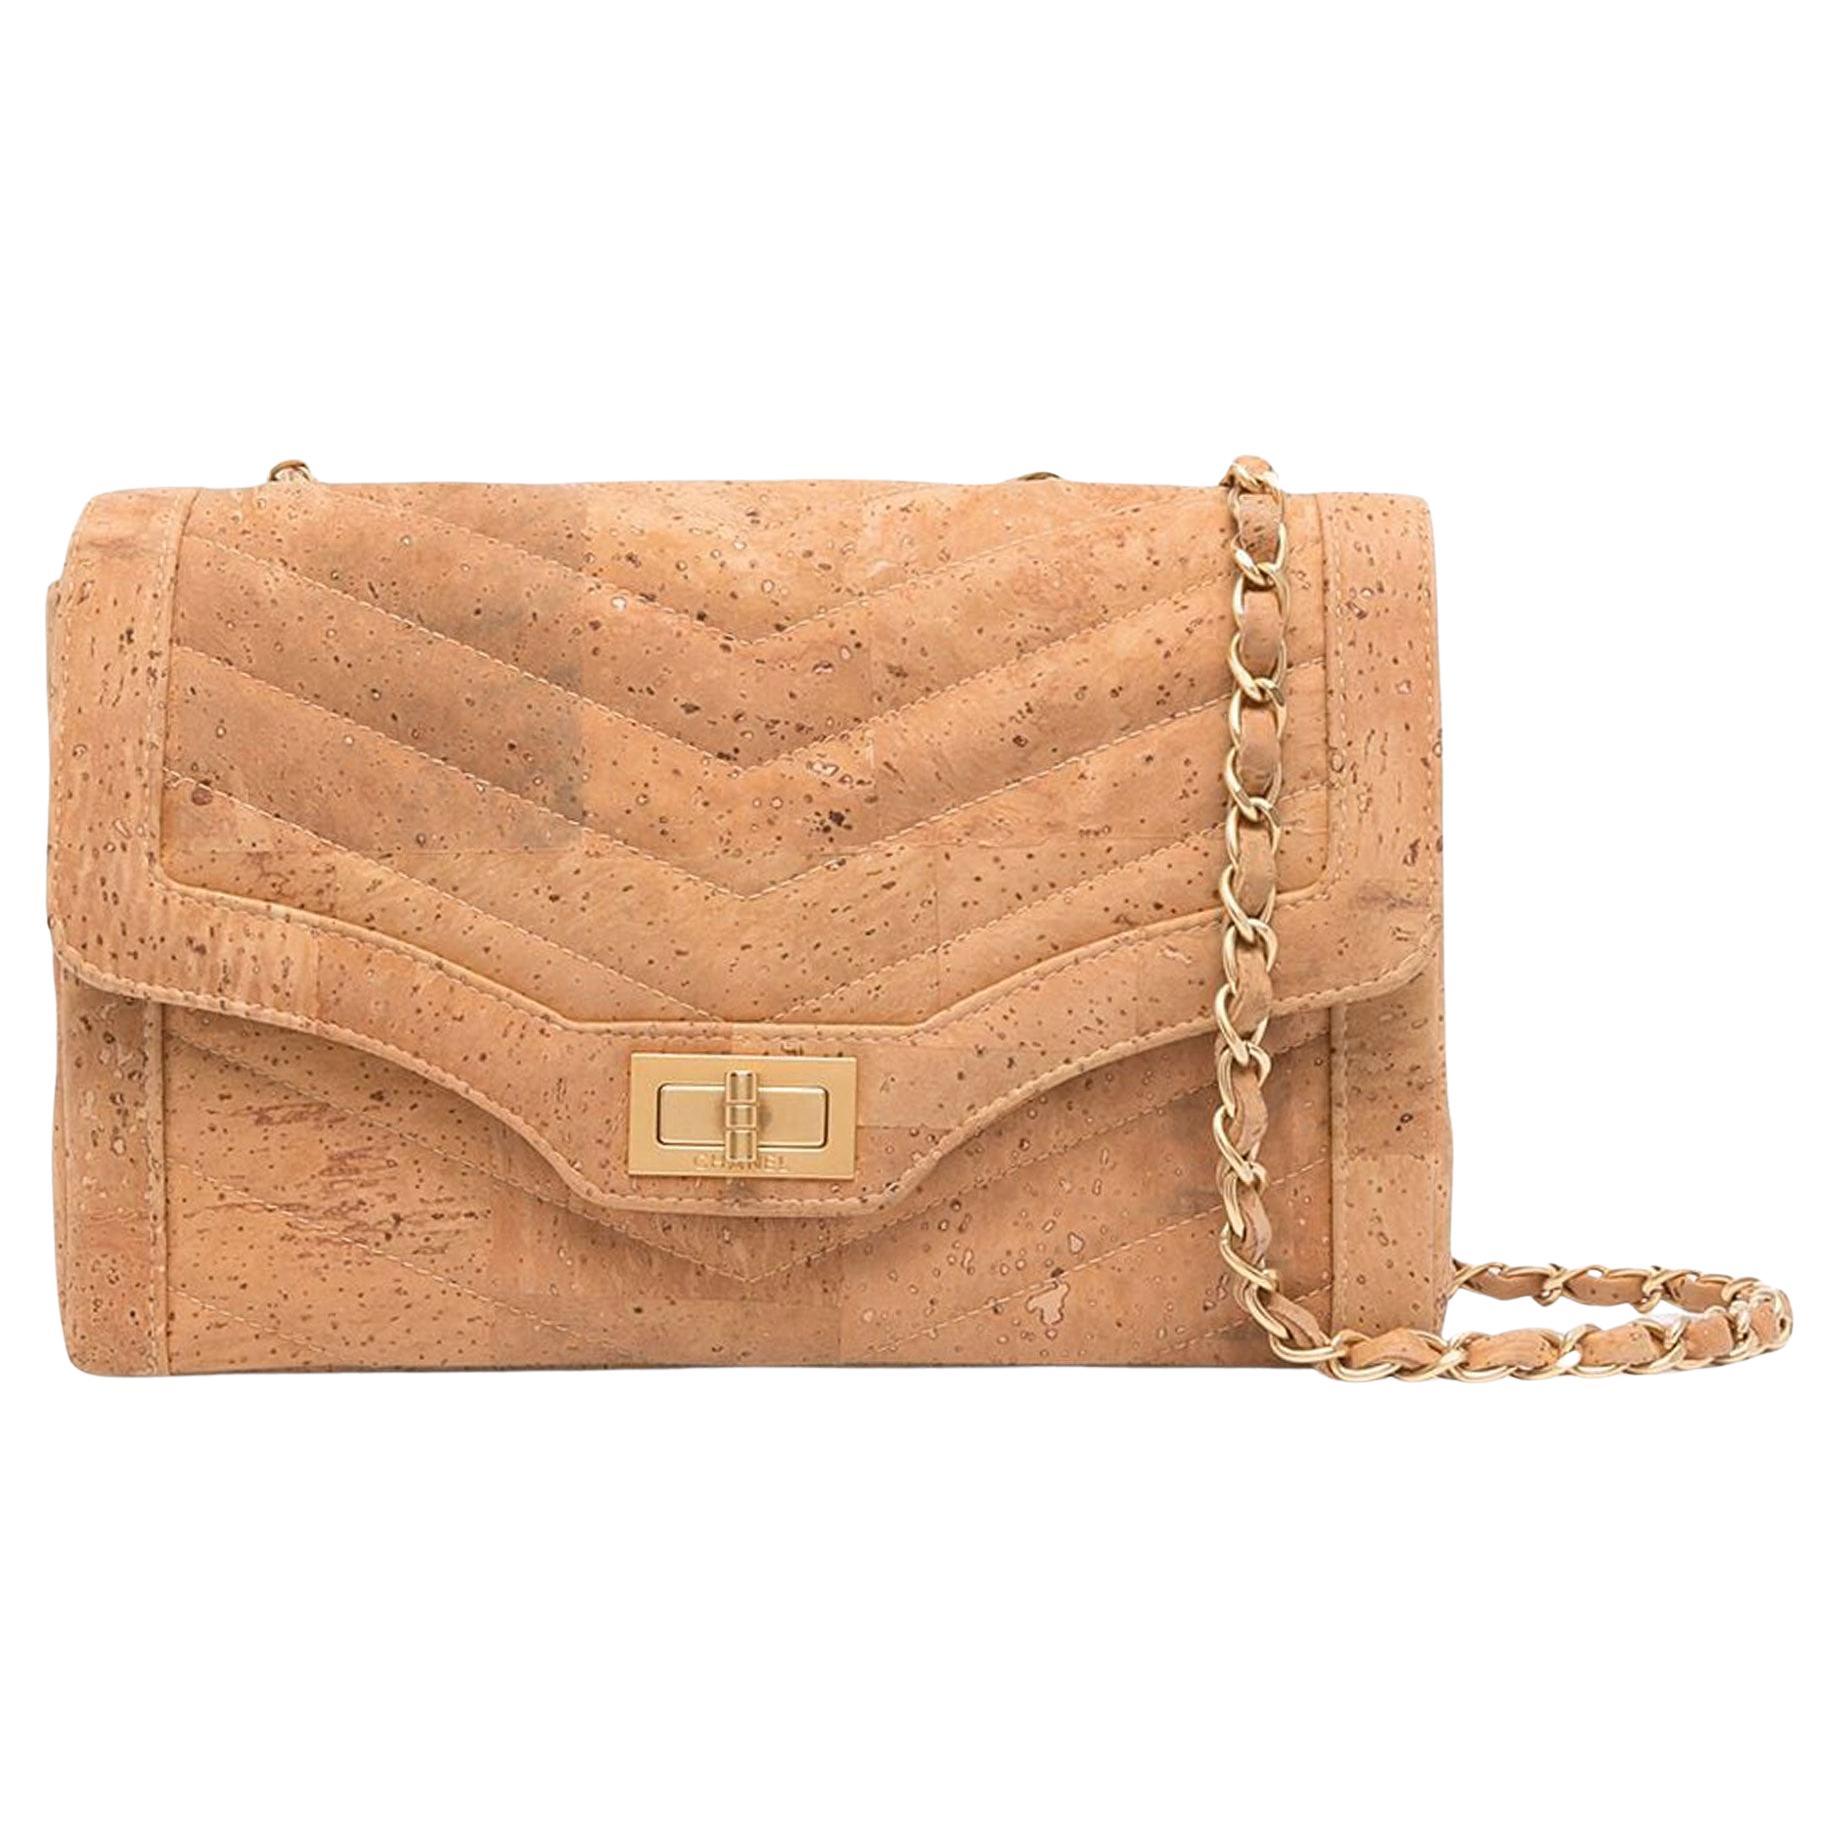 Chanel Rare 2001 Vintage Cork Chevron Quilted Reissue Classic Flap Bag